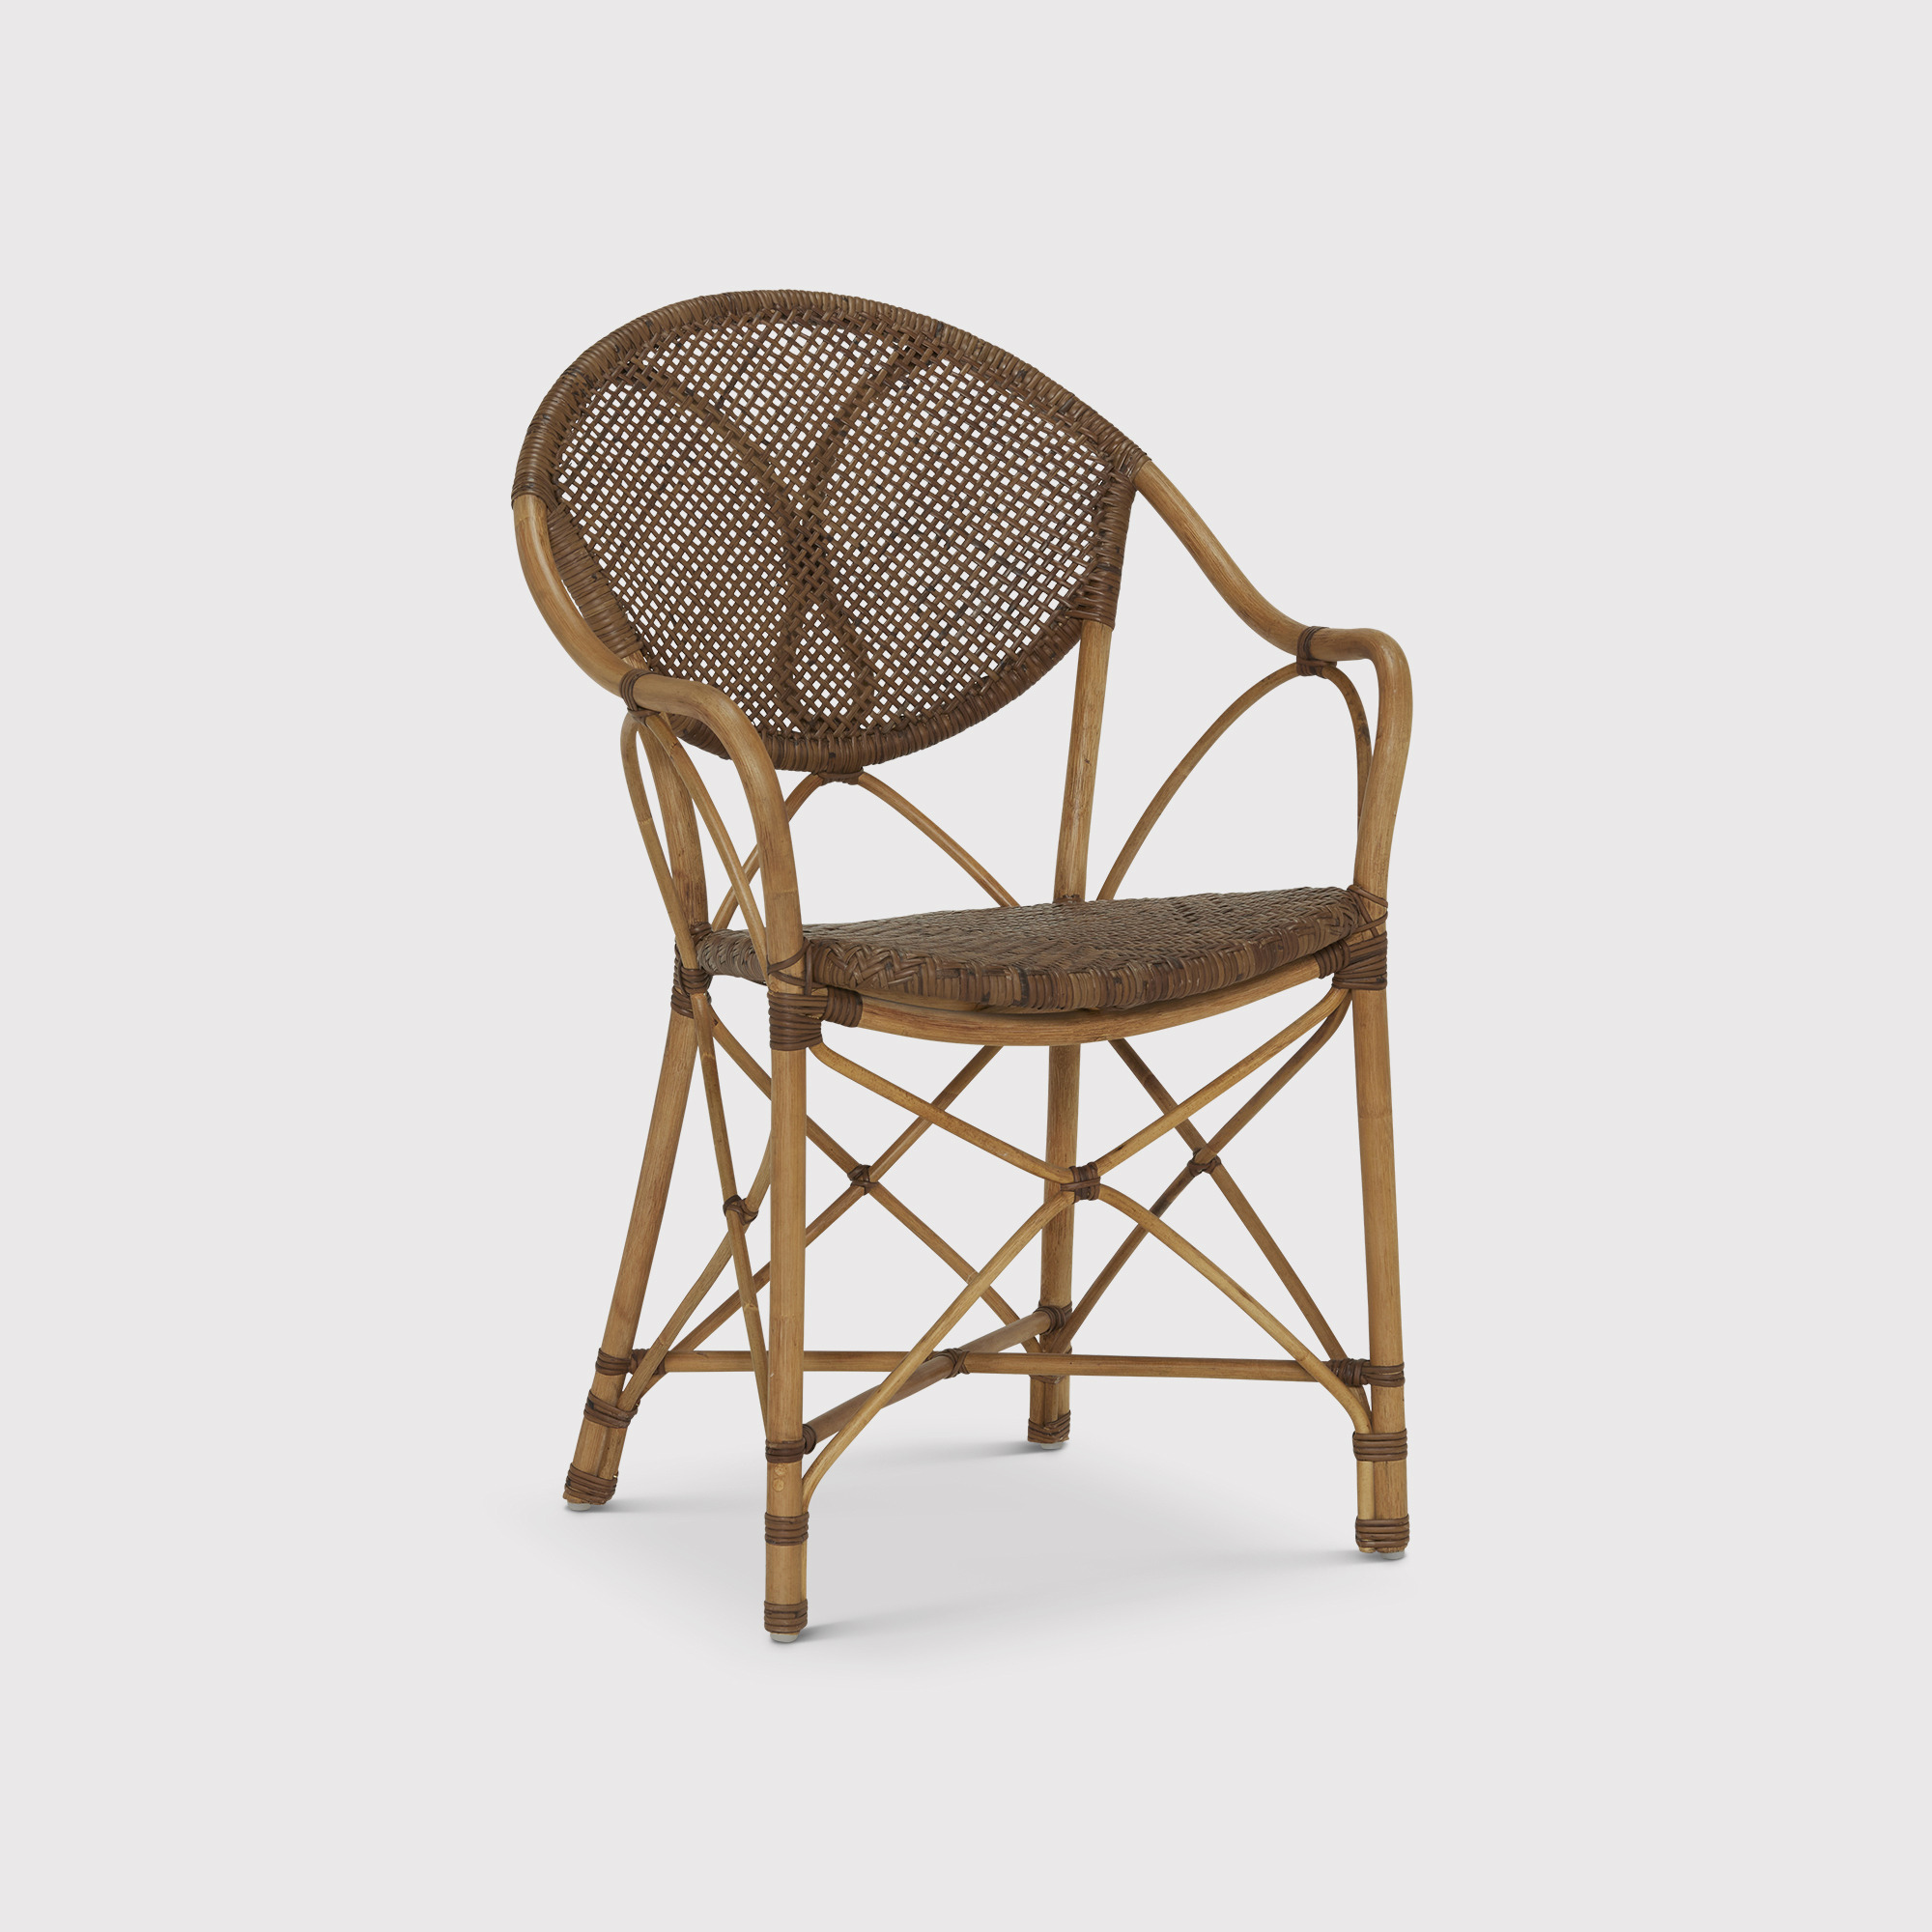 Abigail Dining Arm Dining Chair, Brown Rattan - Barker & Stonehouse - image 1